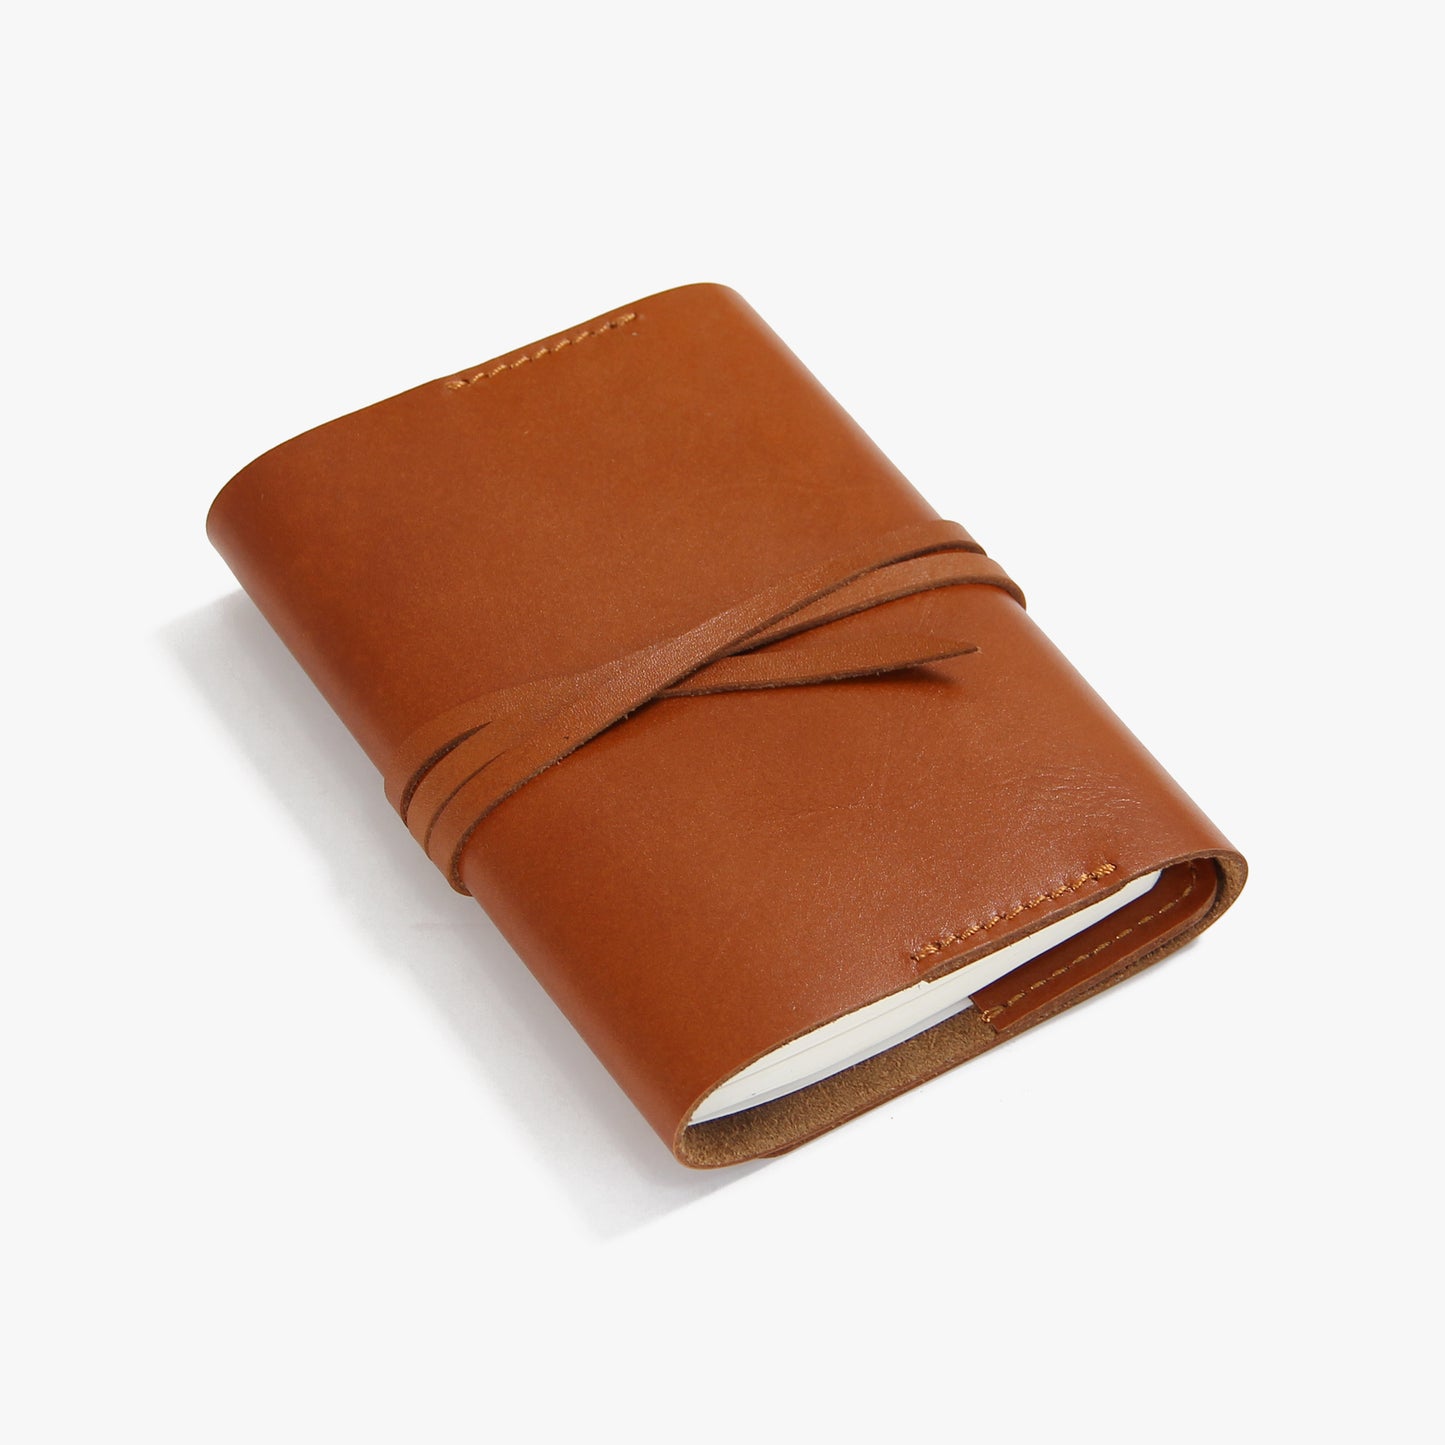 Refillable A6 Notebook Leather Diary Journal Wrap Style